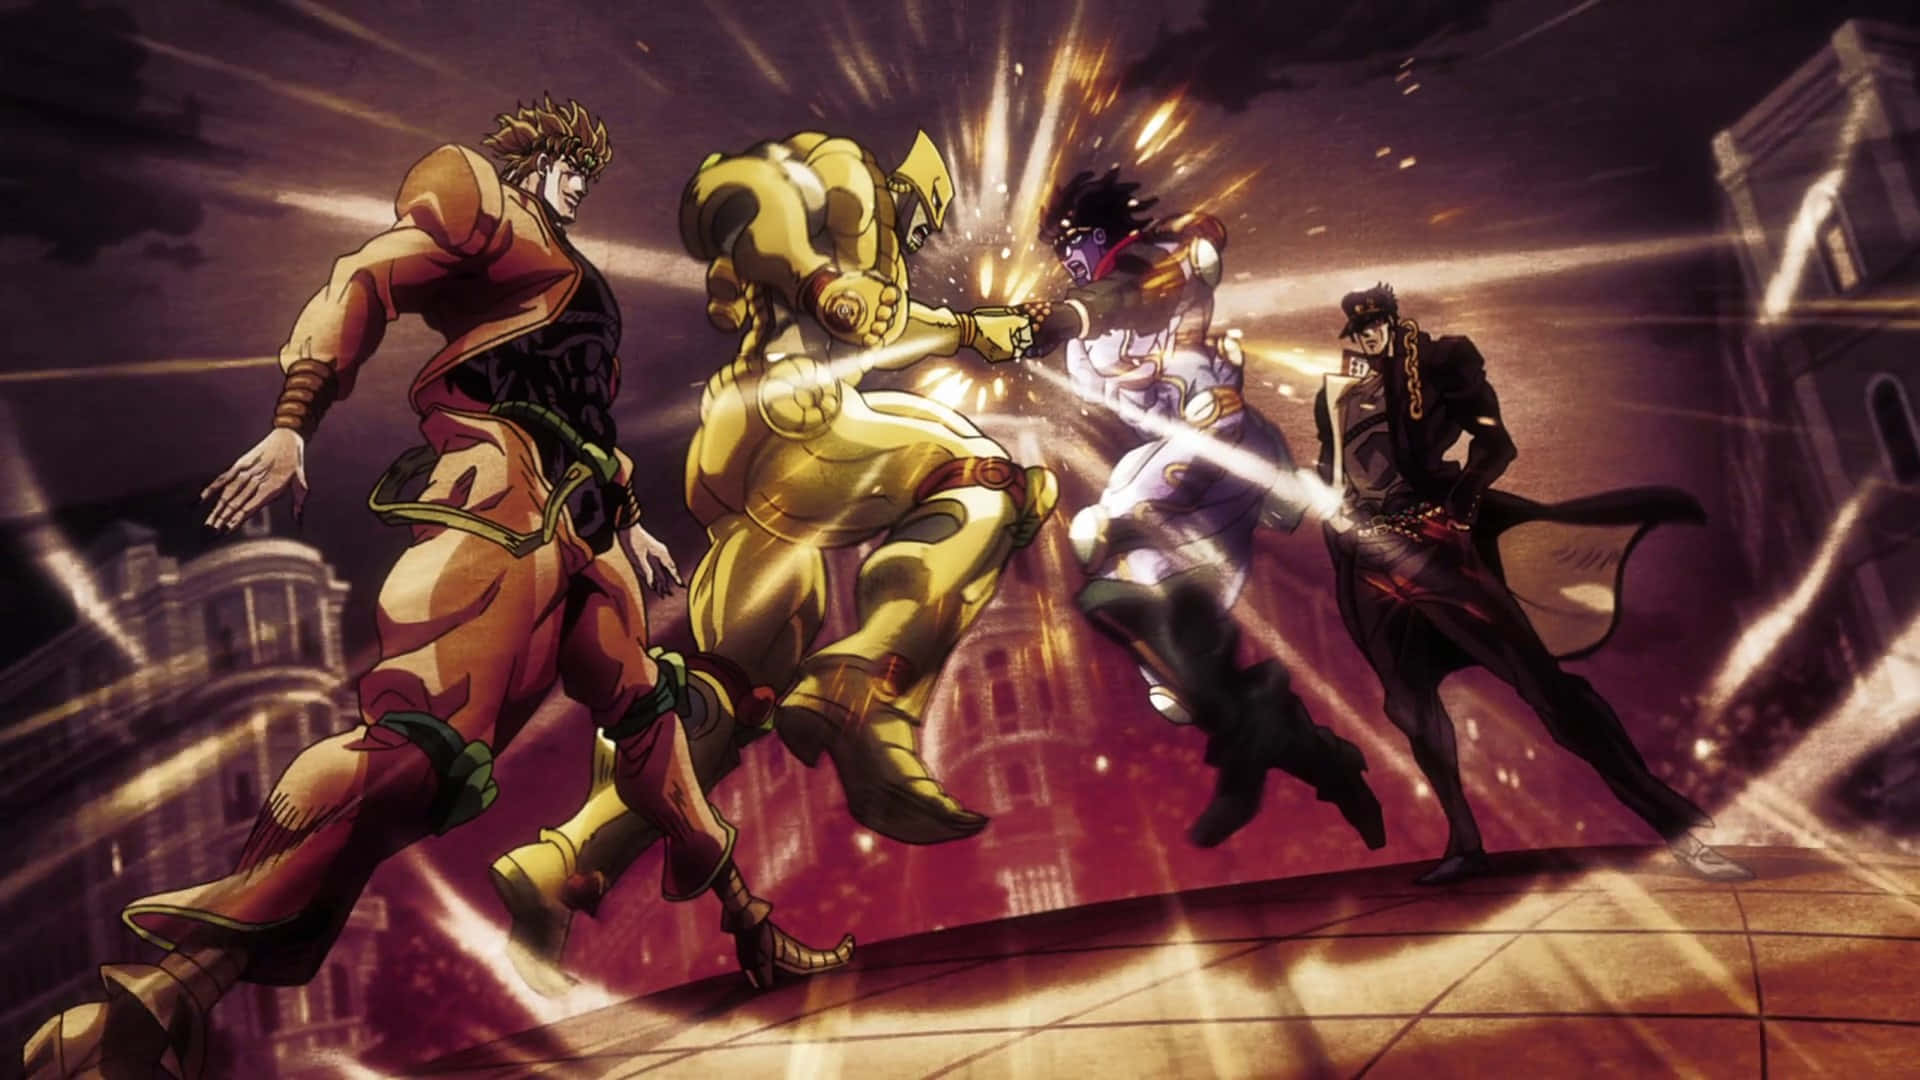 Action-packed scene of the Stardust Crusaders during their adventure Wallpaper